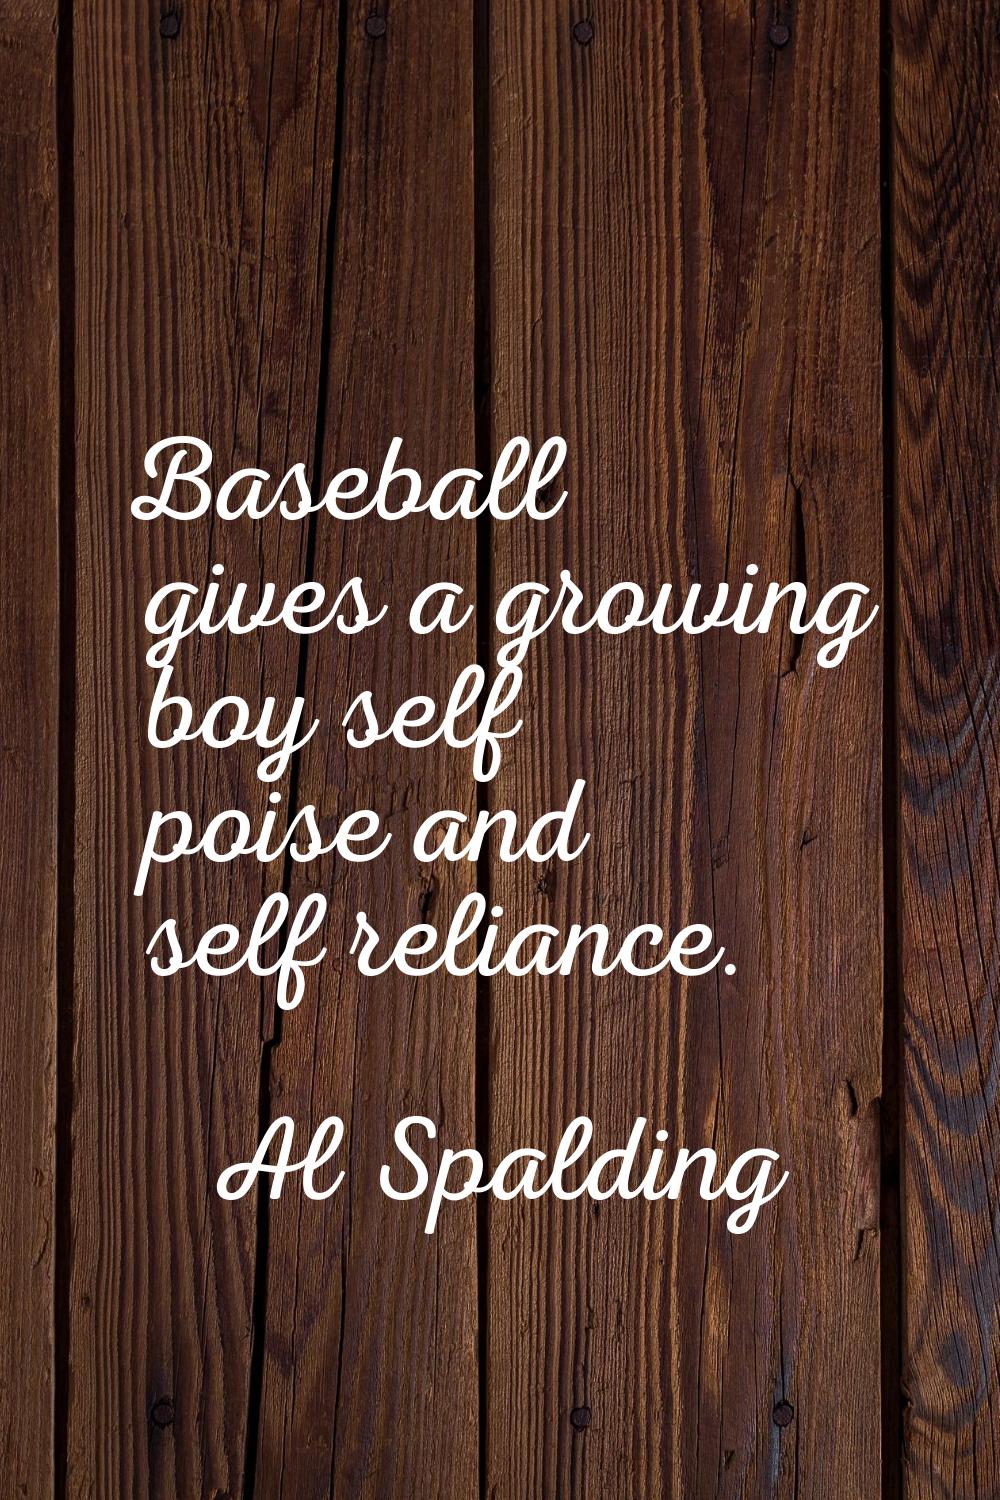 Baseball gives a growing boy self poise and self reliance.